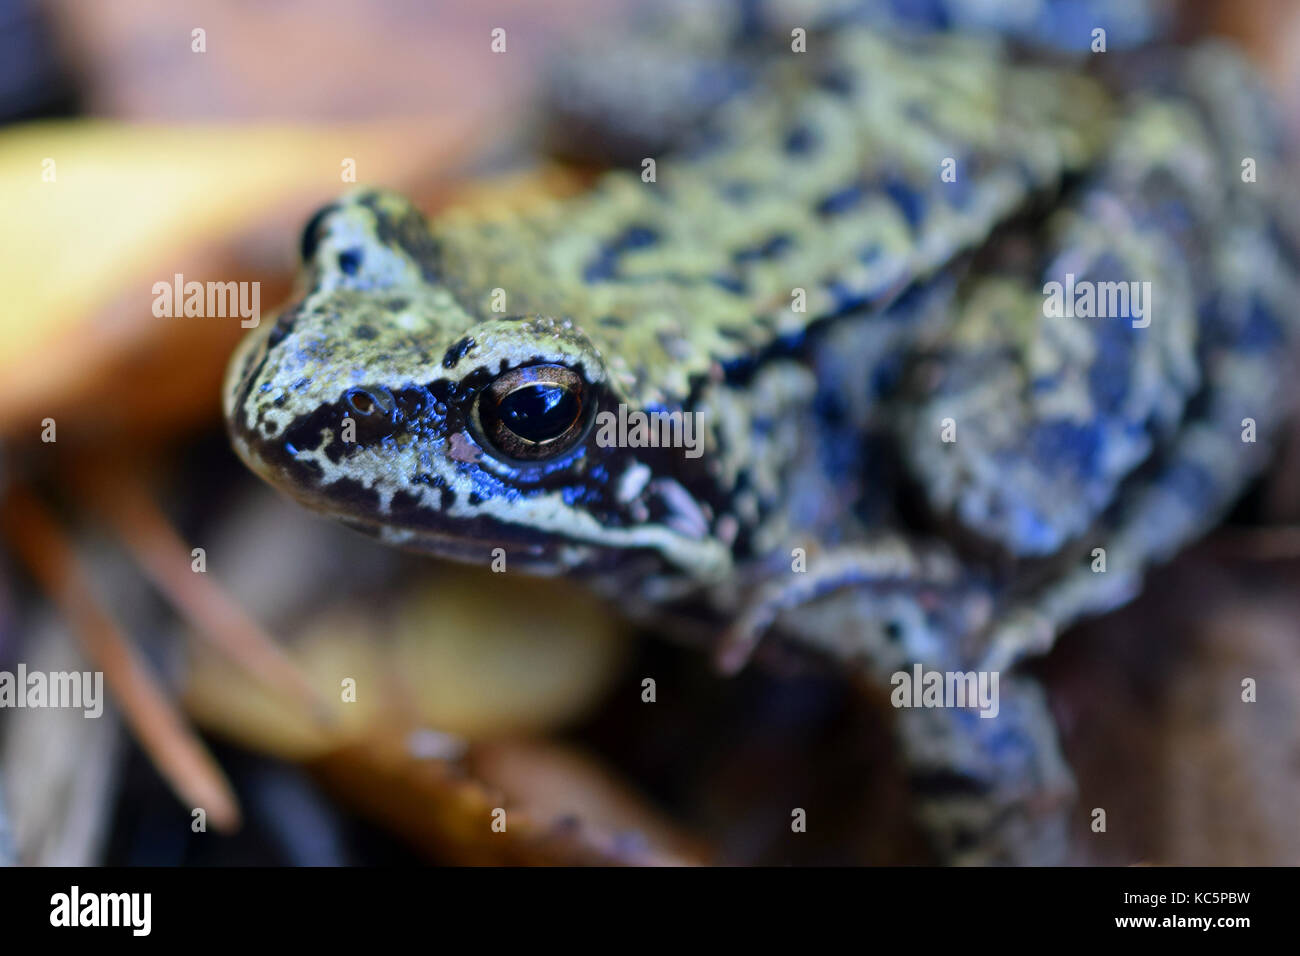 Close up of Common frog (Rana temporaria). Focus on head. Stock Photo